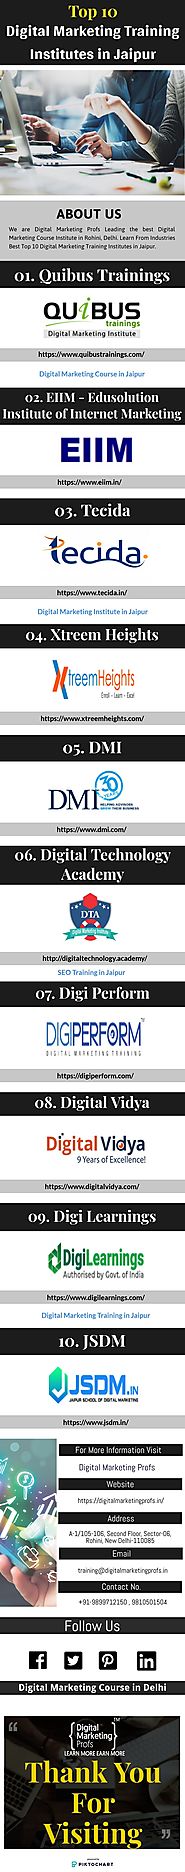 Digital Marketing Course in Jaipur - Infographic